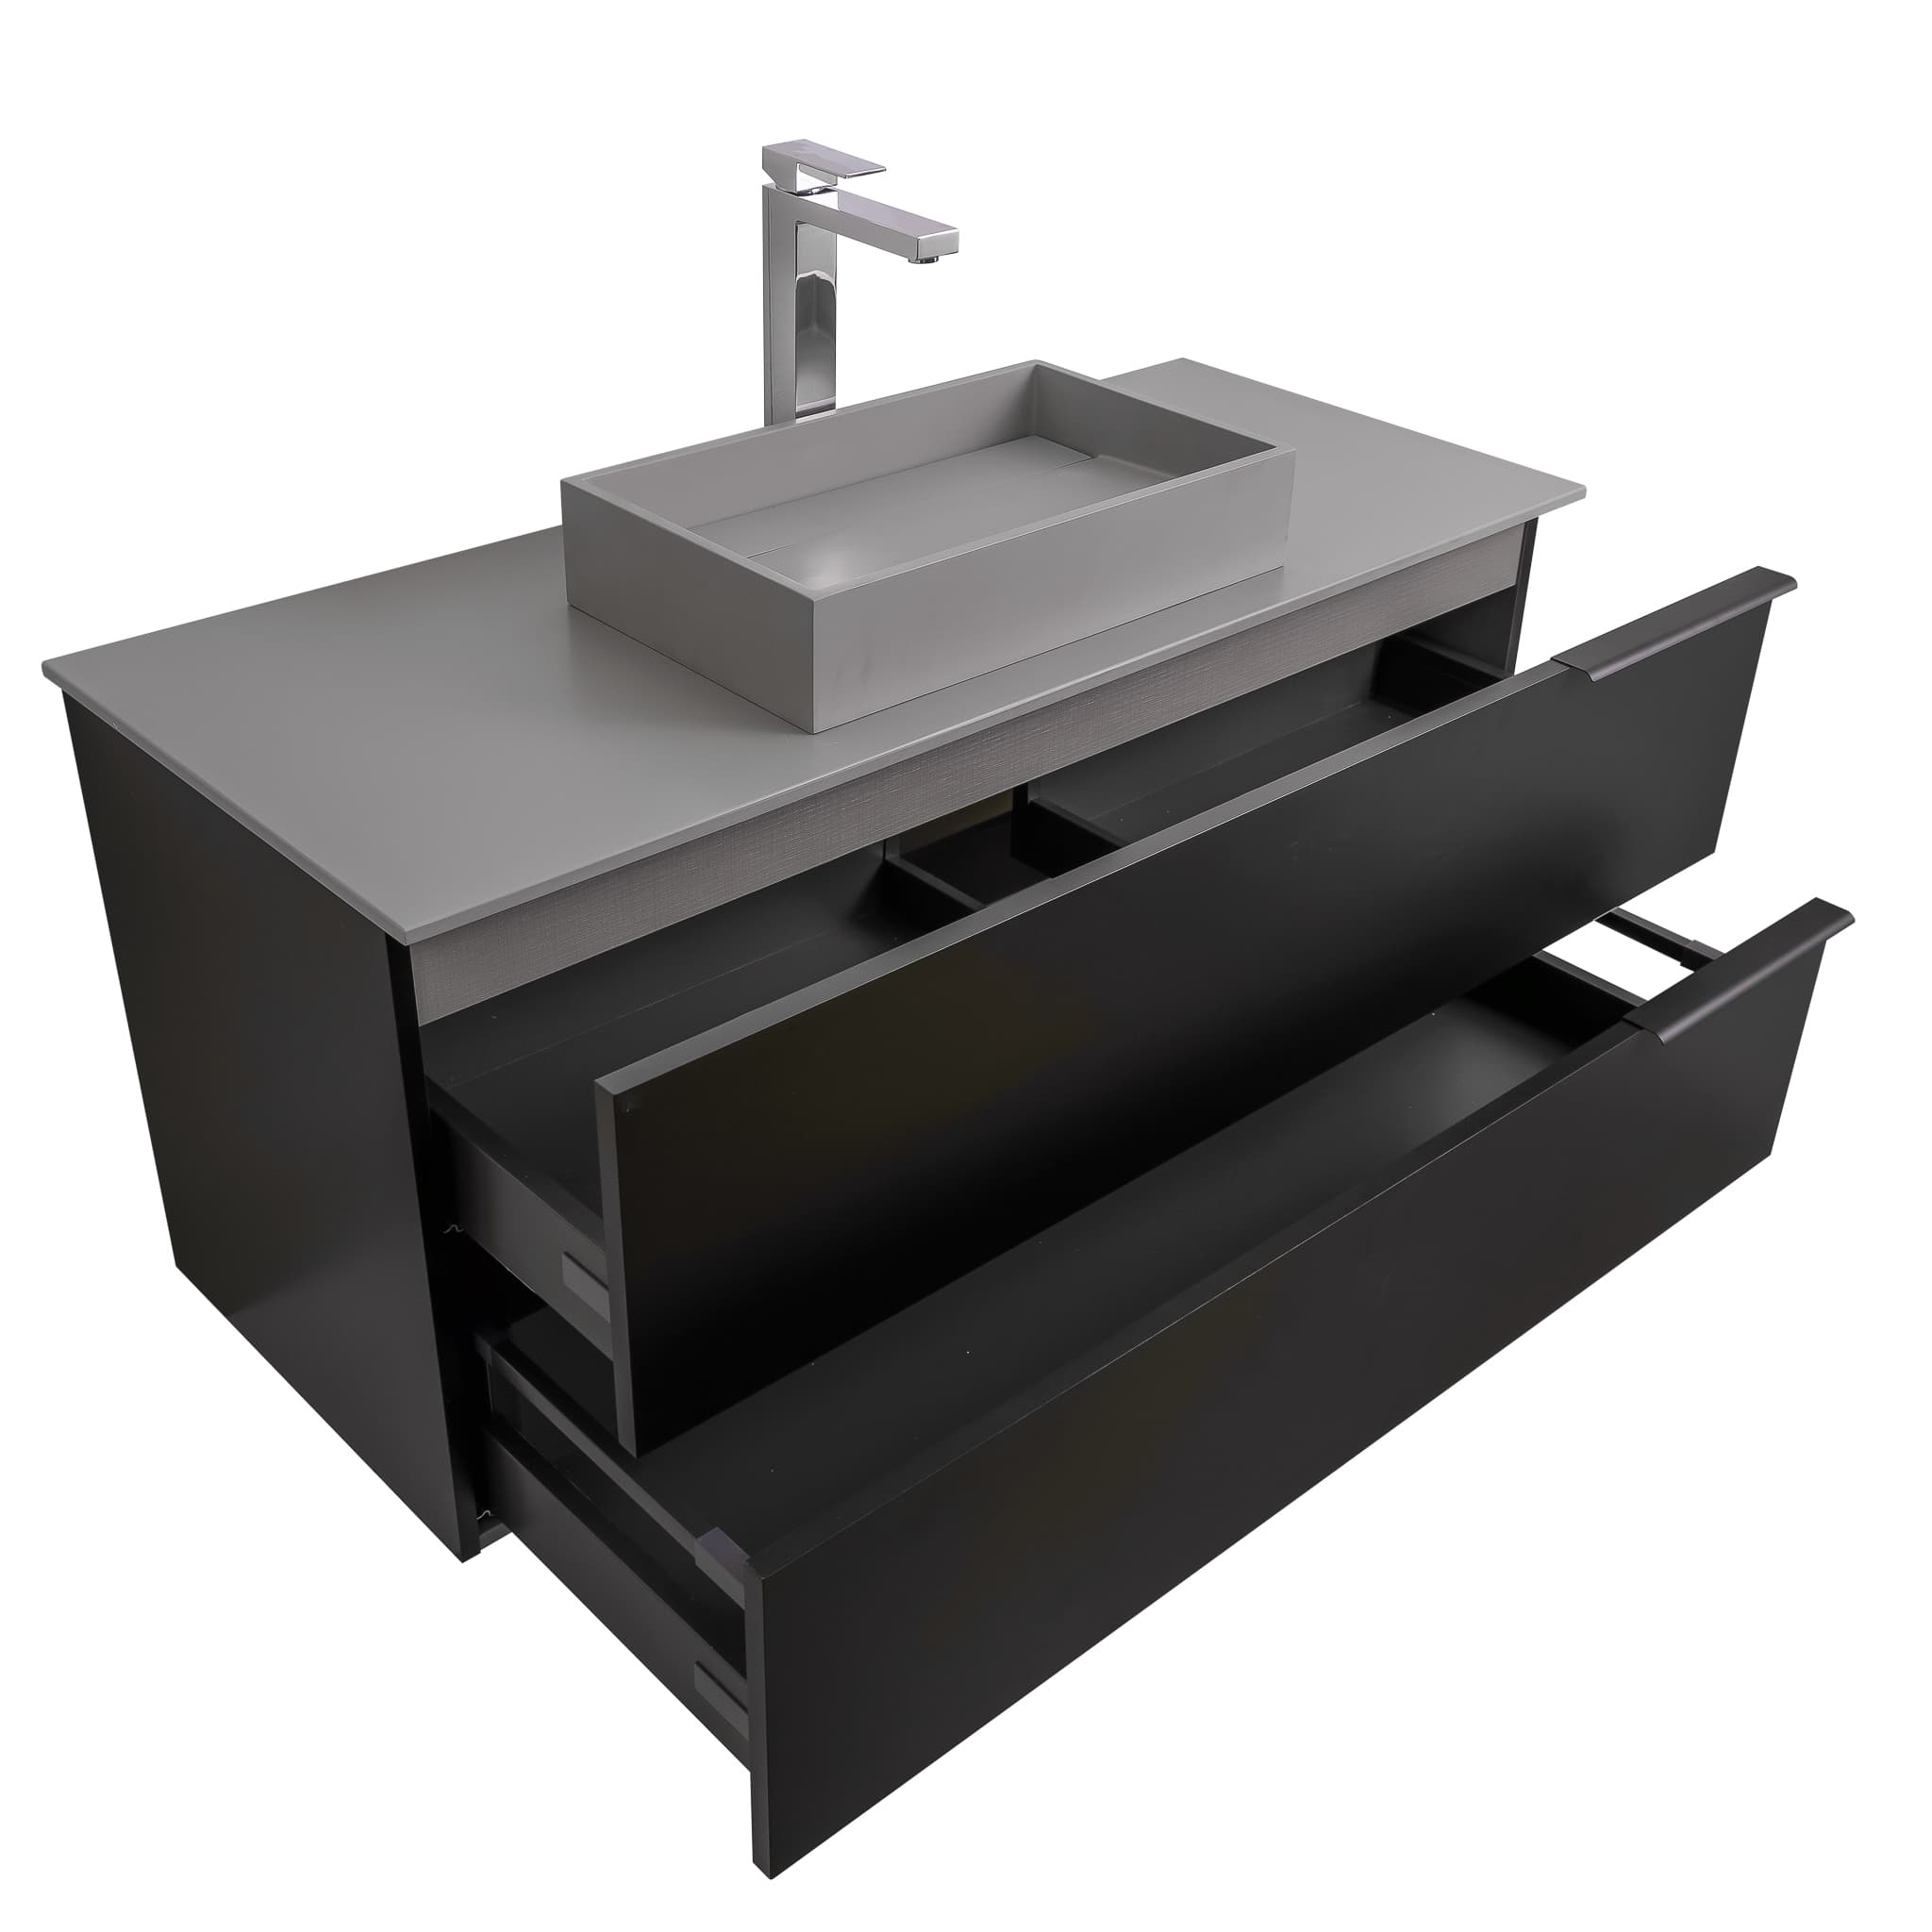 Mallorca 47.5 Matte Black Cabinet, Solid Surface Flat Grey Counter And Infinity Square Solid Surface Grey Basin 1329, Wall Mounted Modern Vanity Set